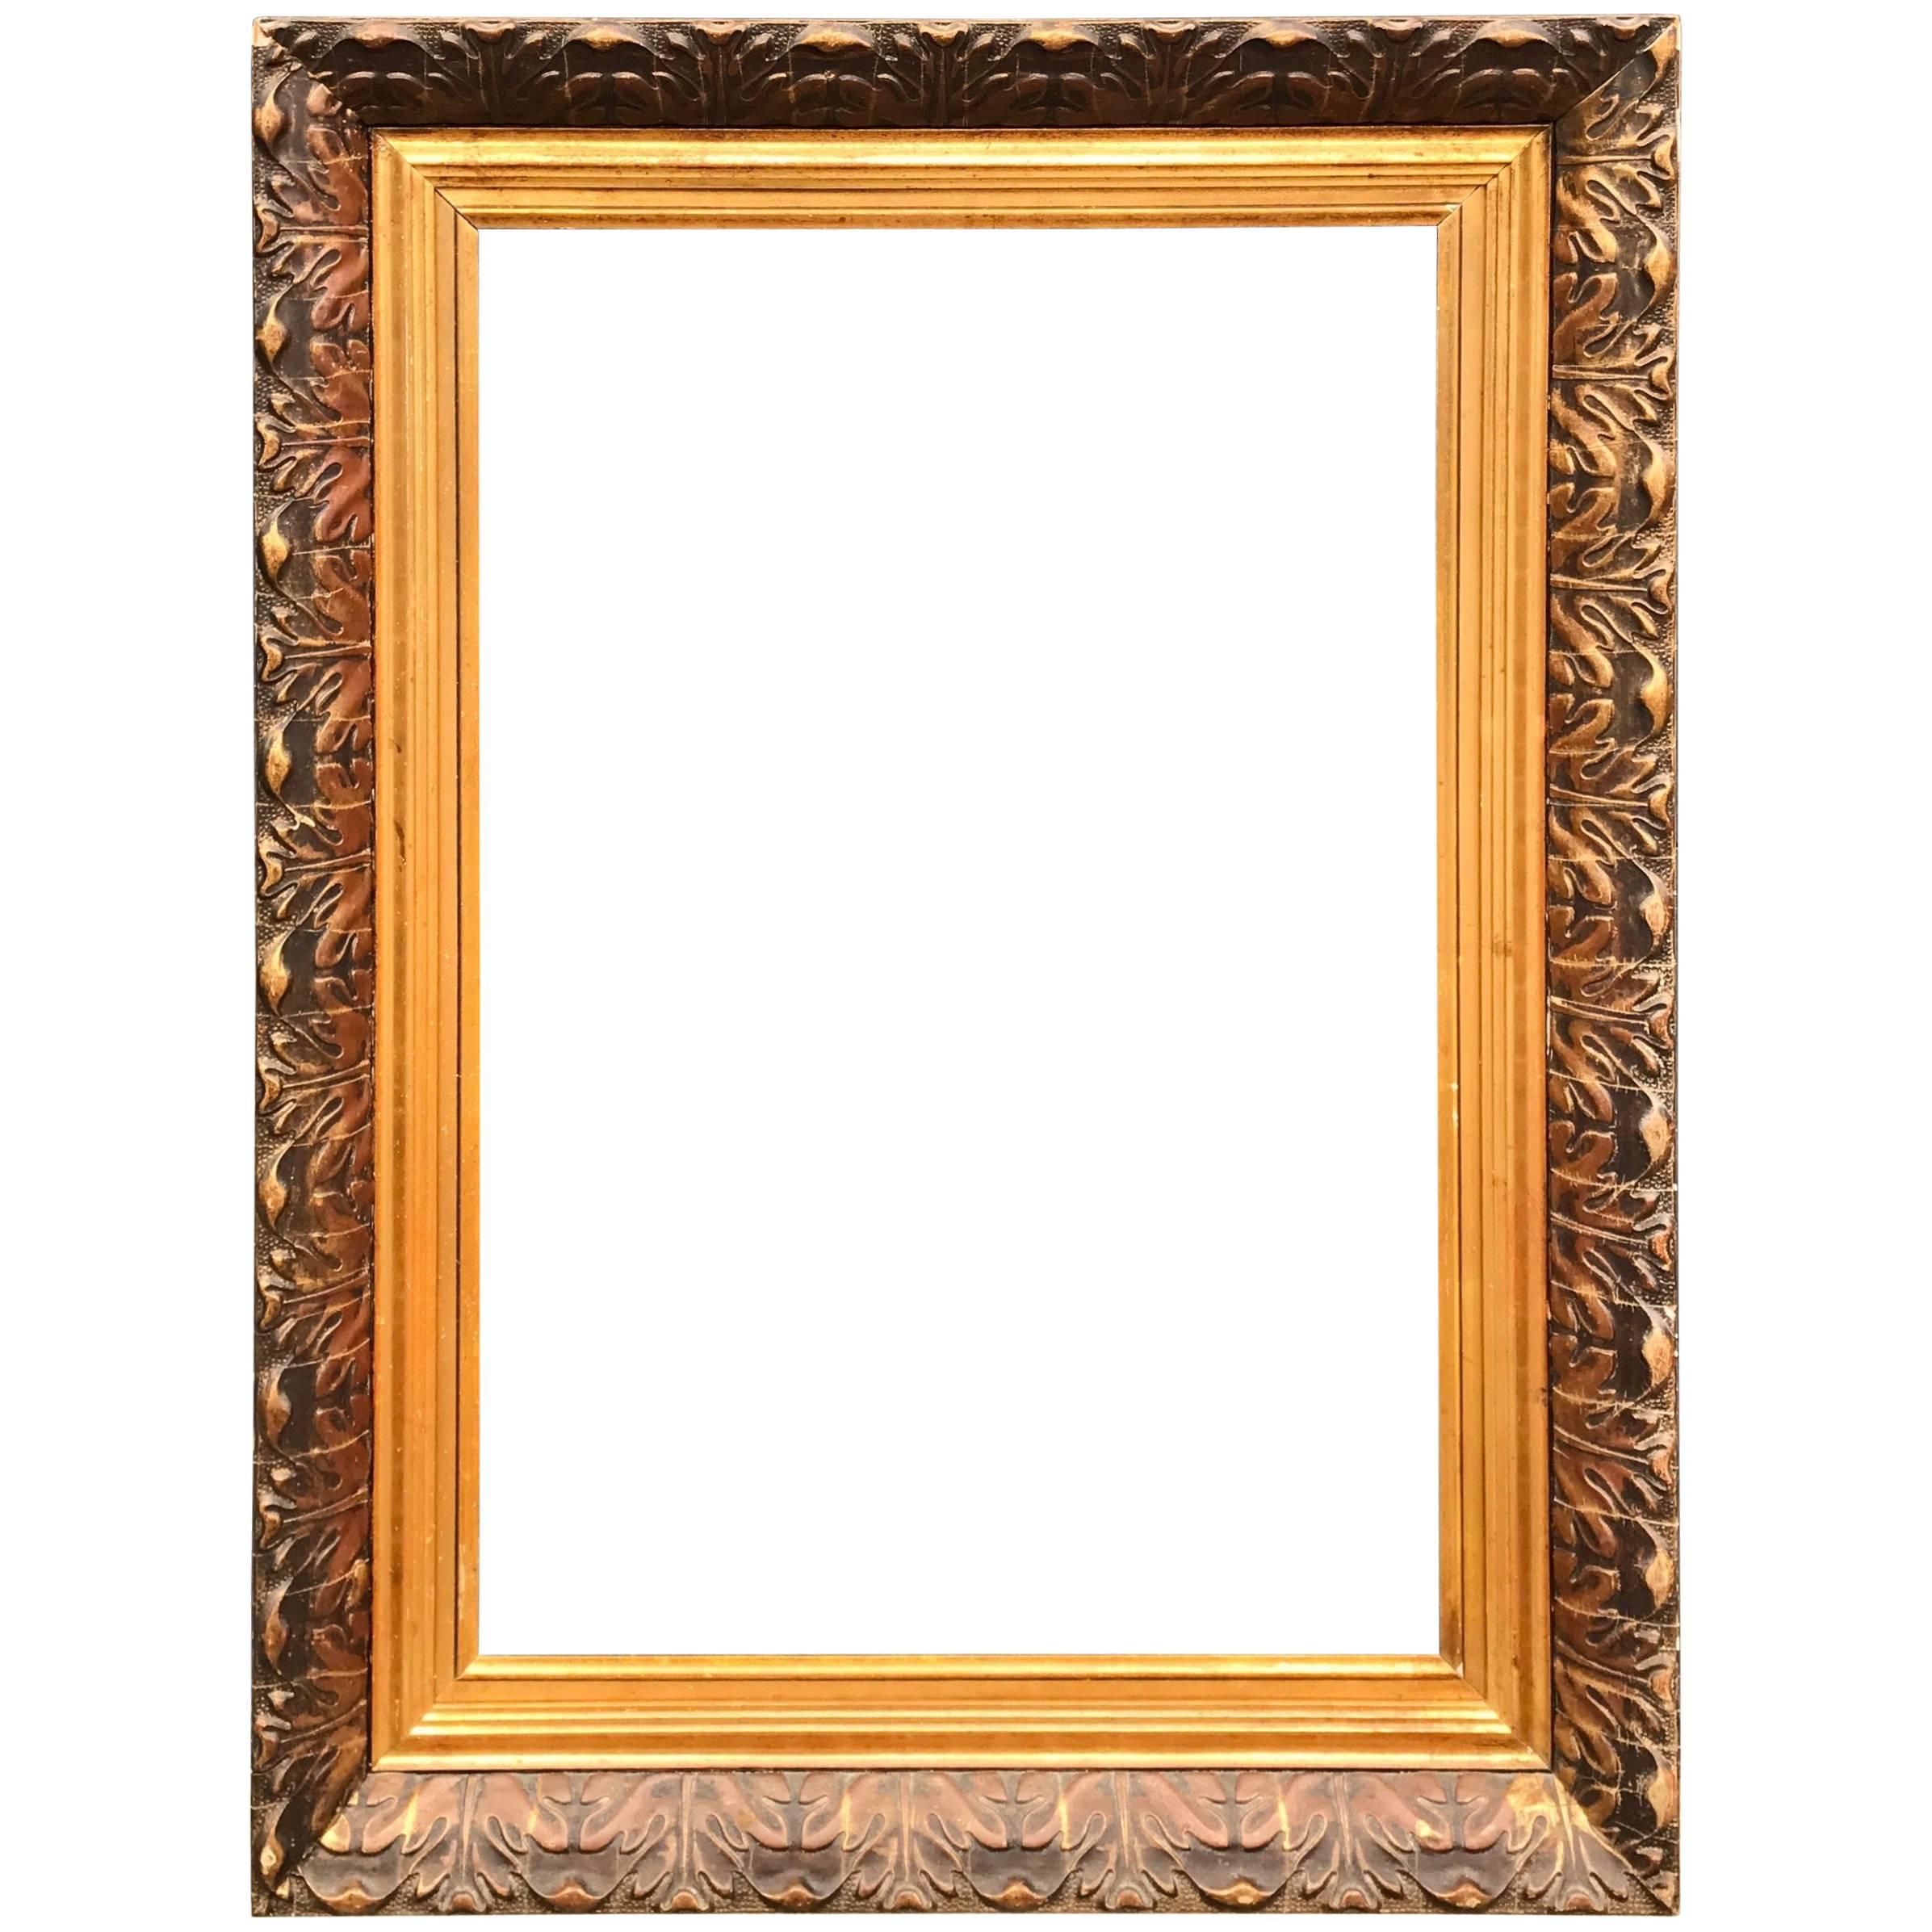 Large and Decorative Gilded Antique Painting or Mirror Frame with Leaf Motifs For Sale